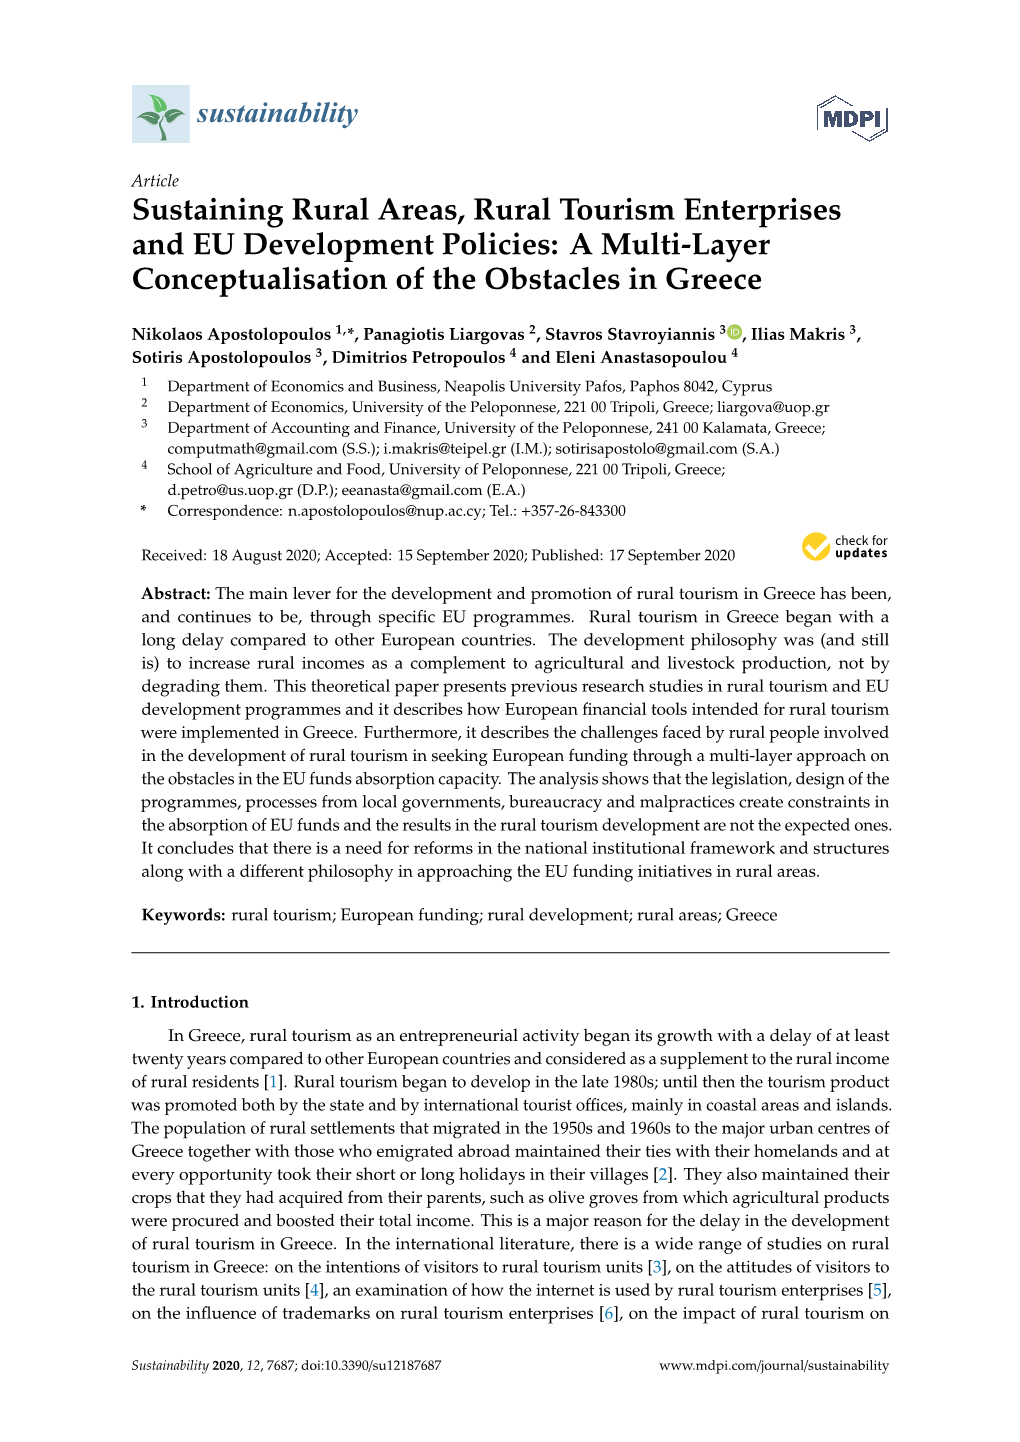 Sustaining Rural Areas, Rural Tourism Enterprises and EU Development Policies: a Multi-Layer Conceptualisation of the Obstacles in Greece